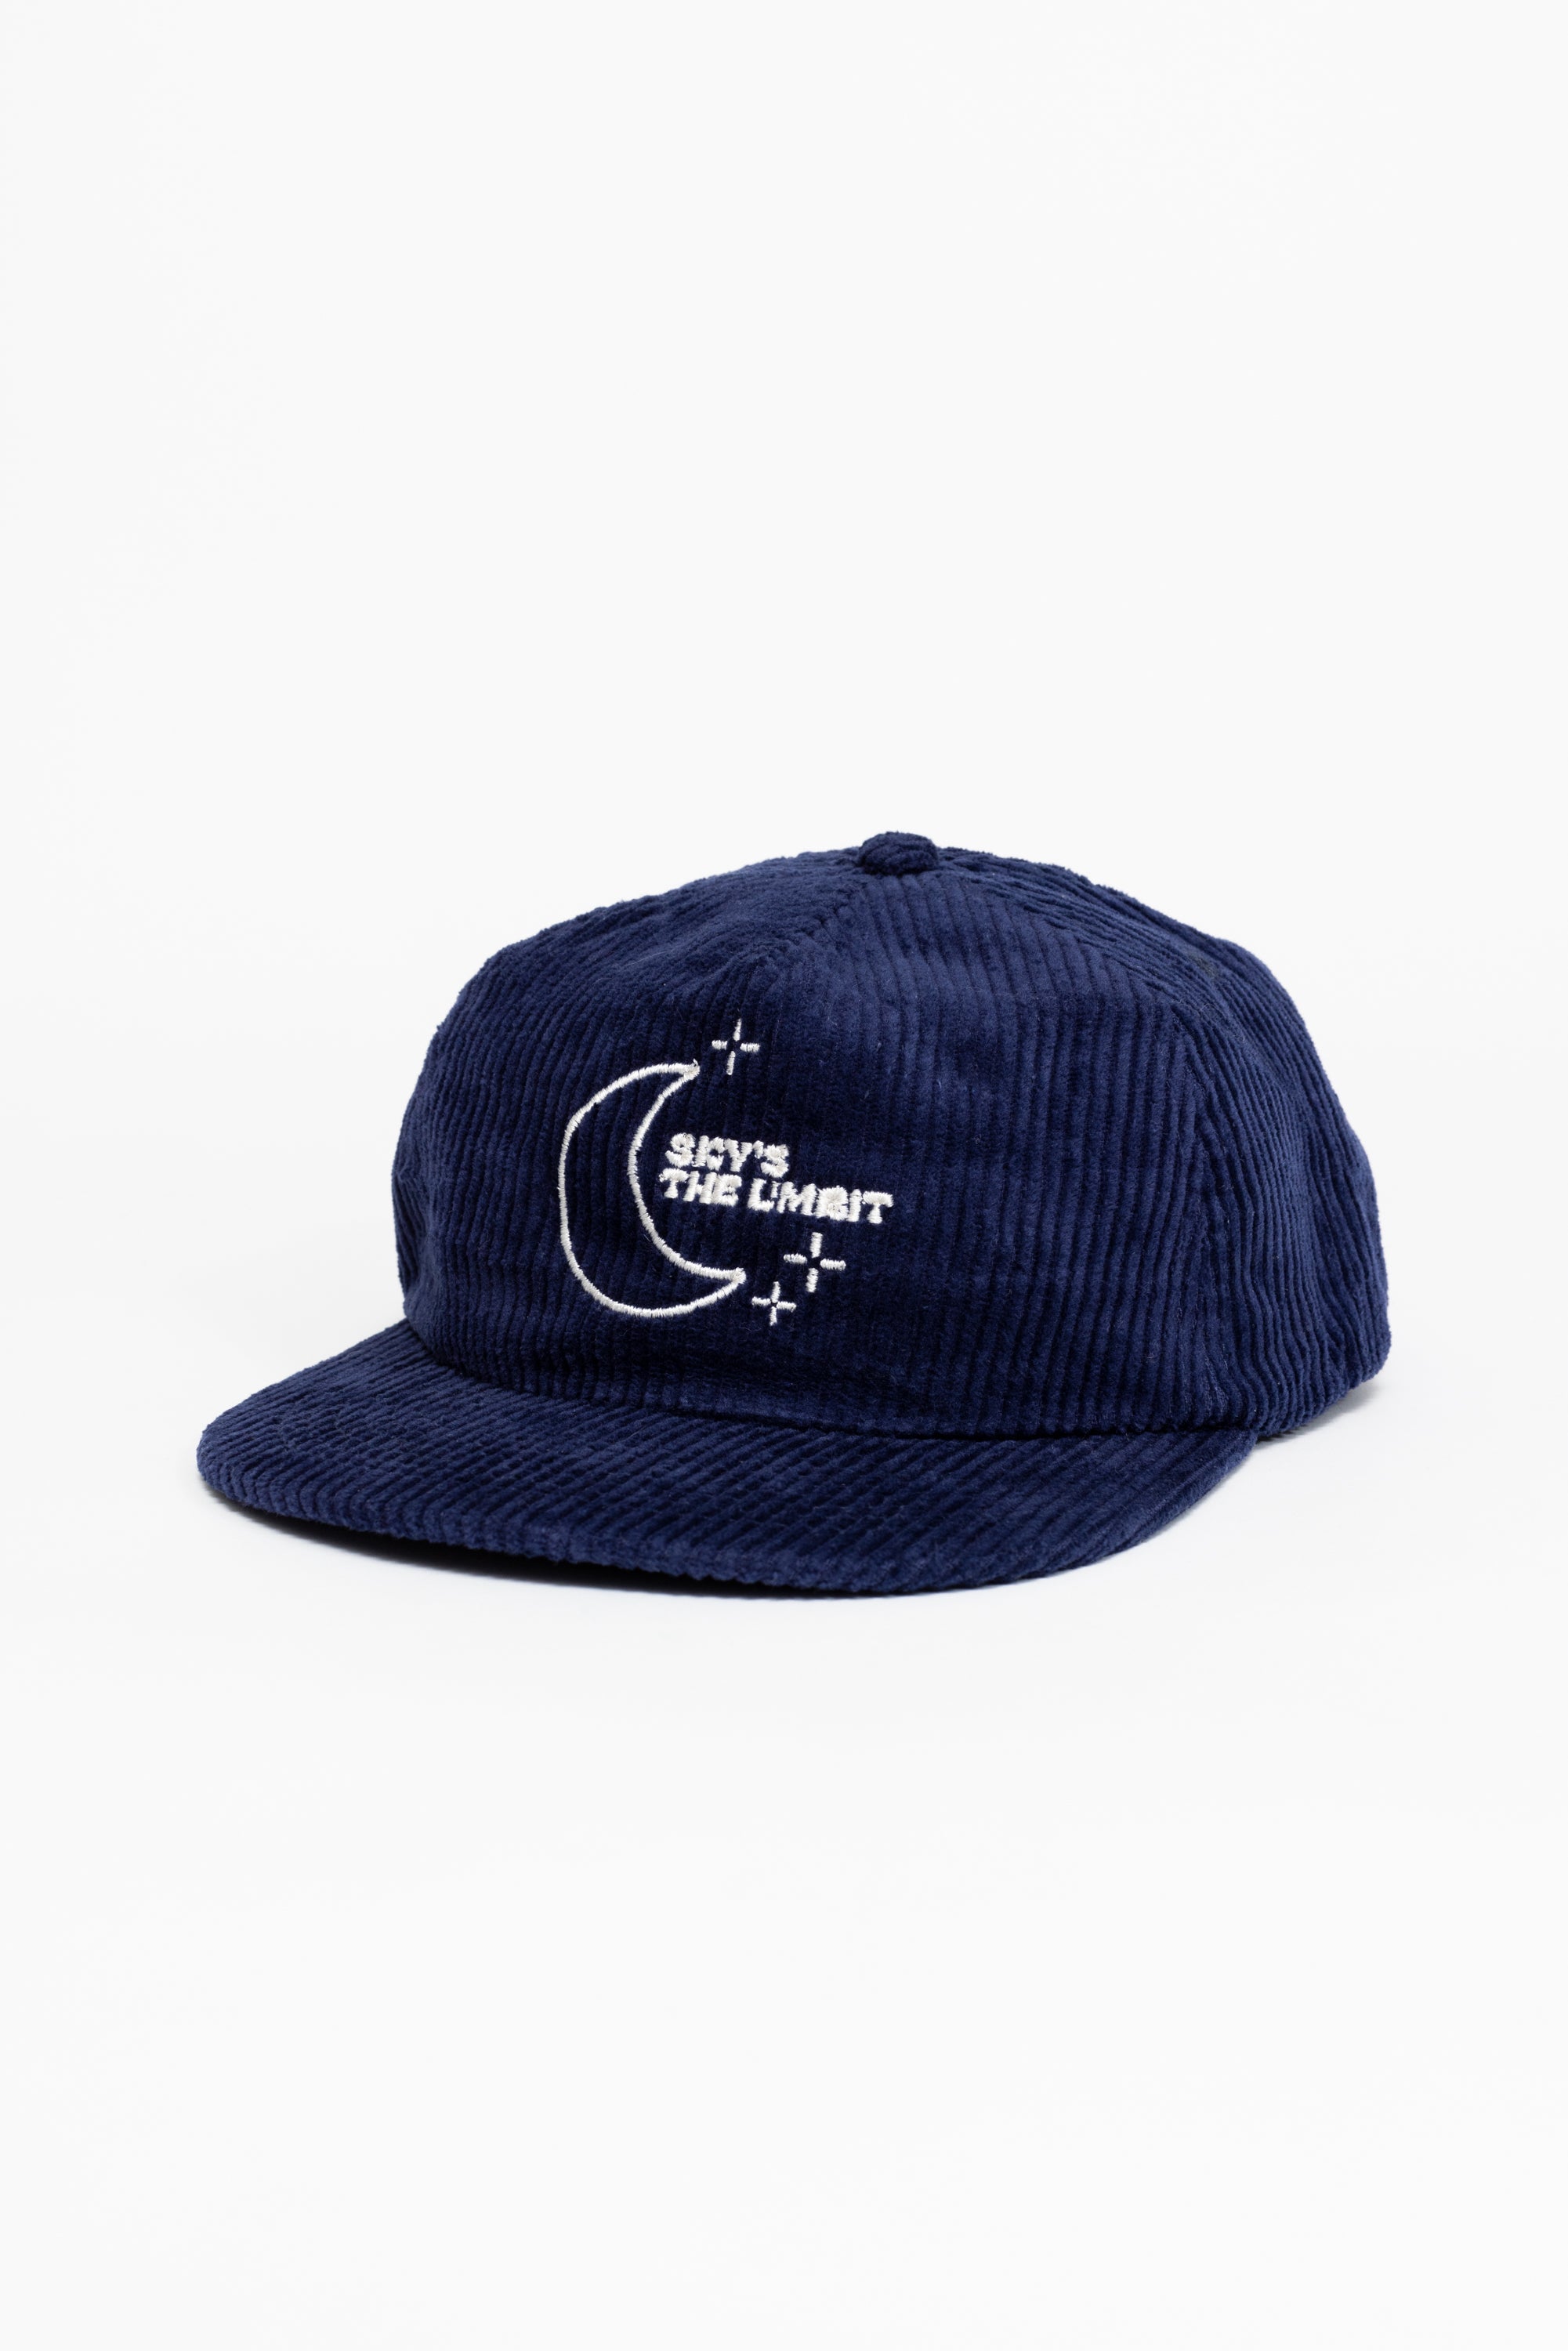 A dark blue baseball cap that has a illustration of the moon and the stars that says in white font "Sky's the Limbit."